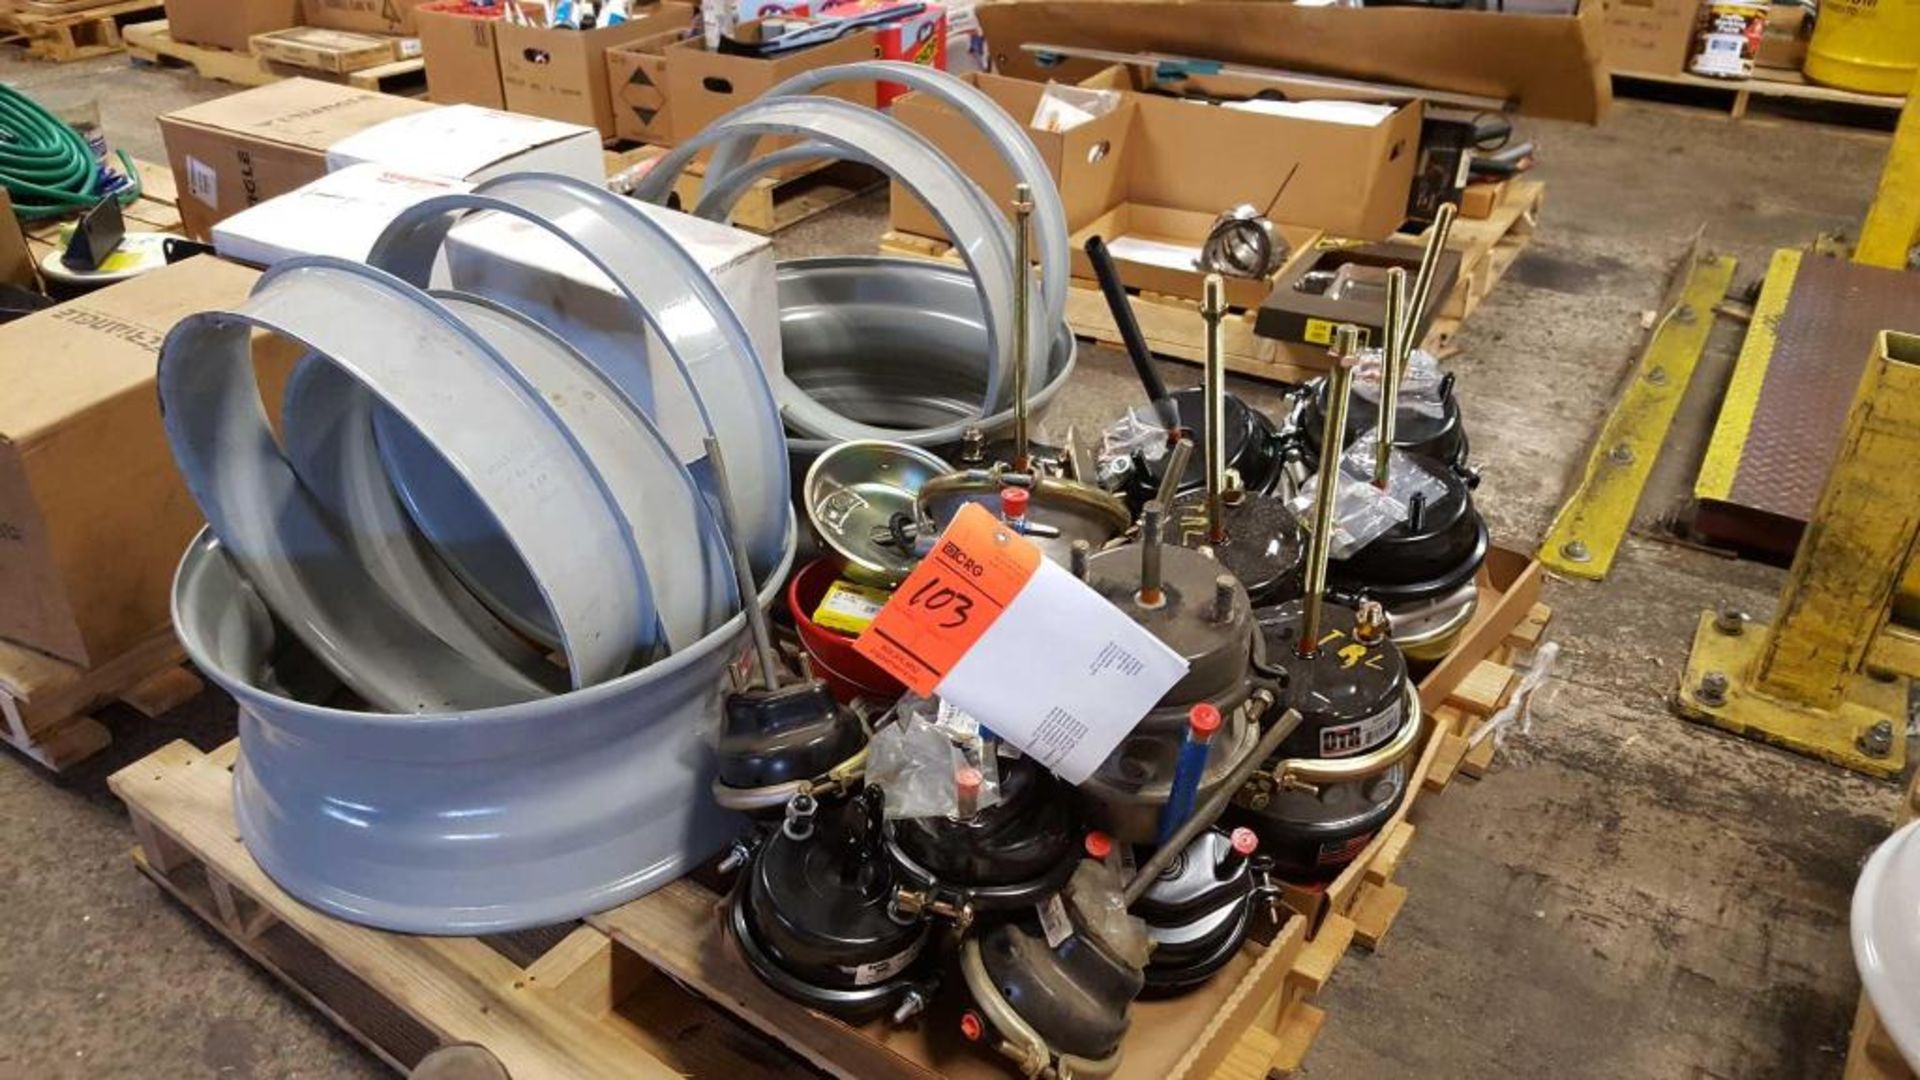 Lot of assorted brake chambers and tubeless rims, etc.